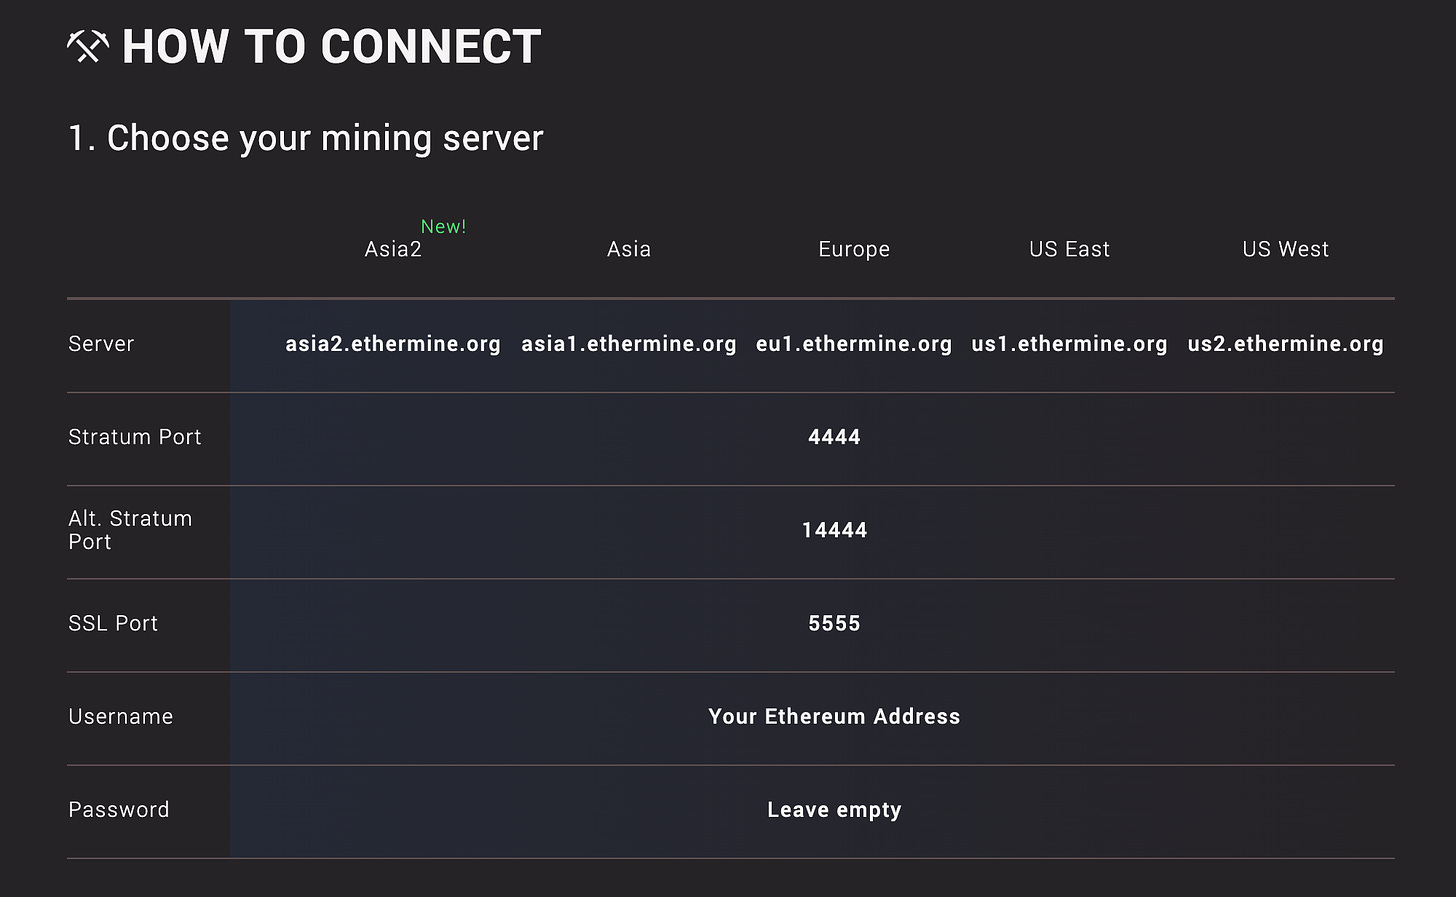 How to mine Ethereum on Windows 10 (or other cryptocurrencies) to generate passive income